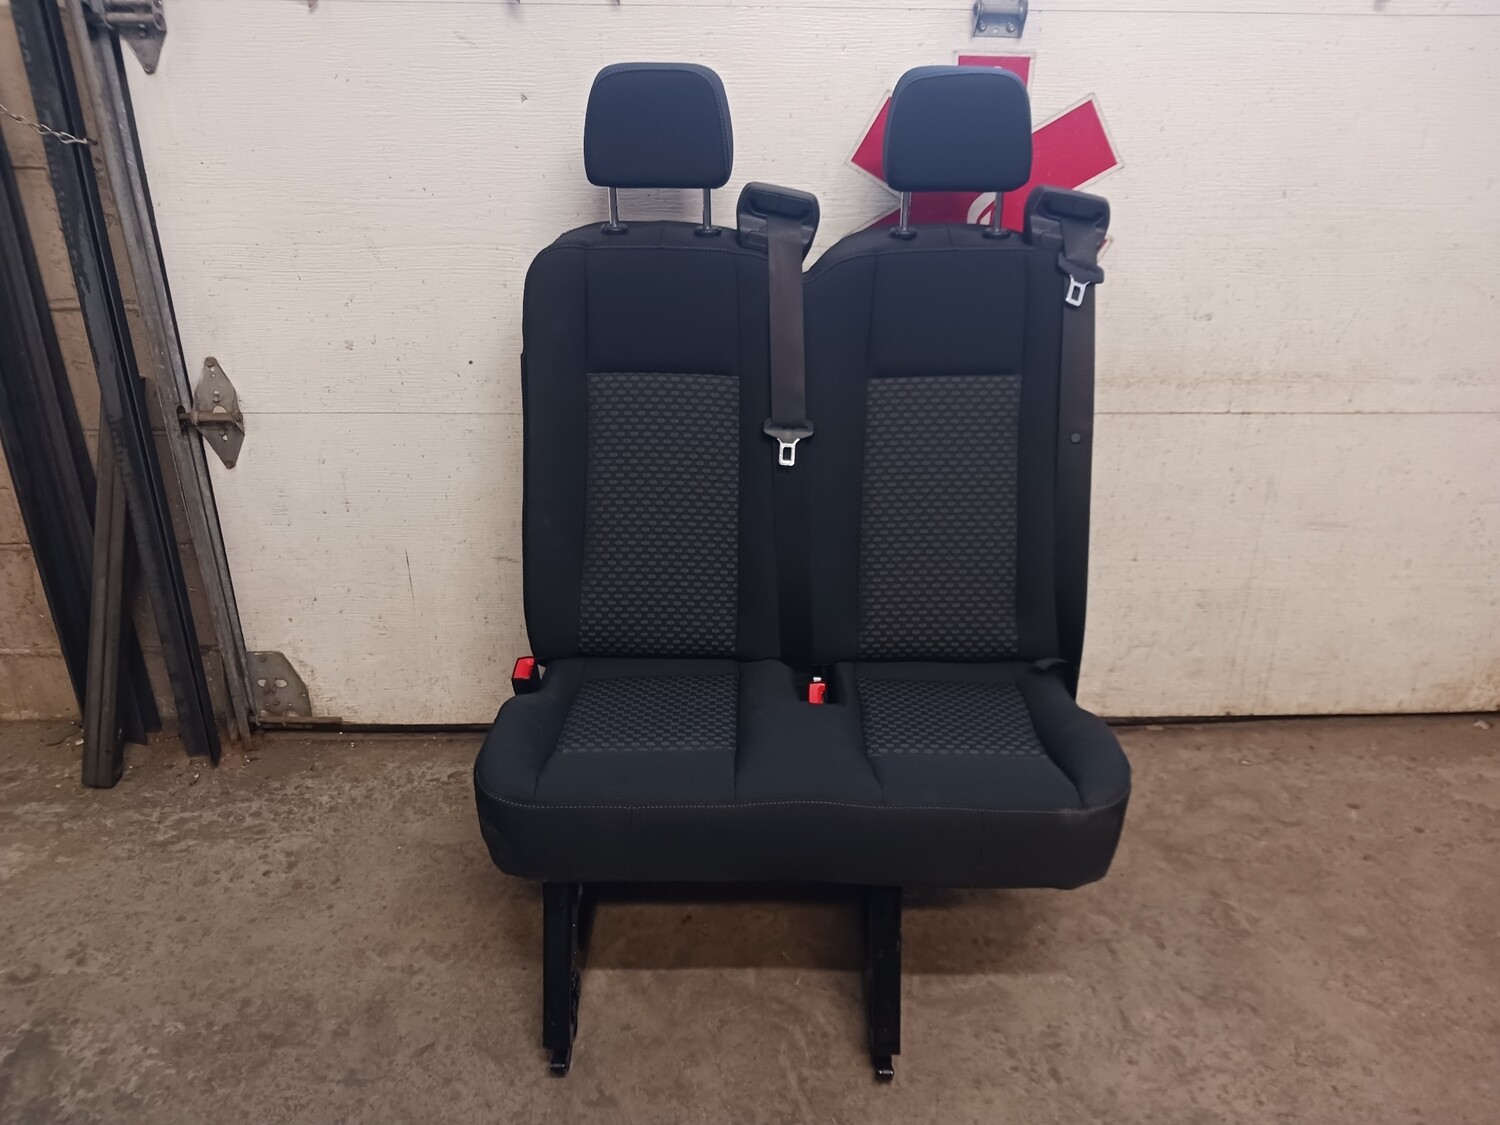 2 Passenger Bench Seat - Removable